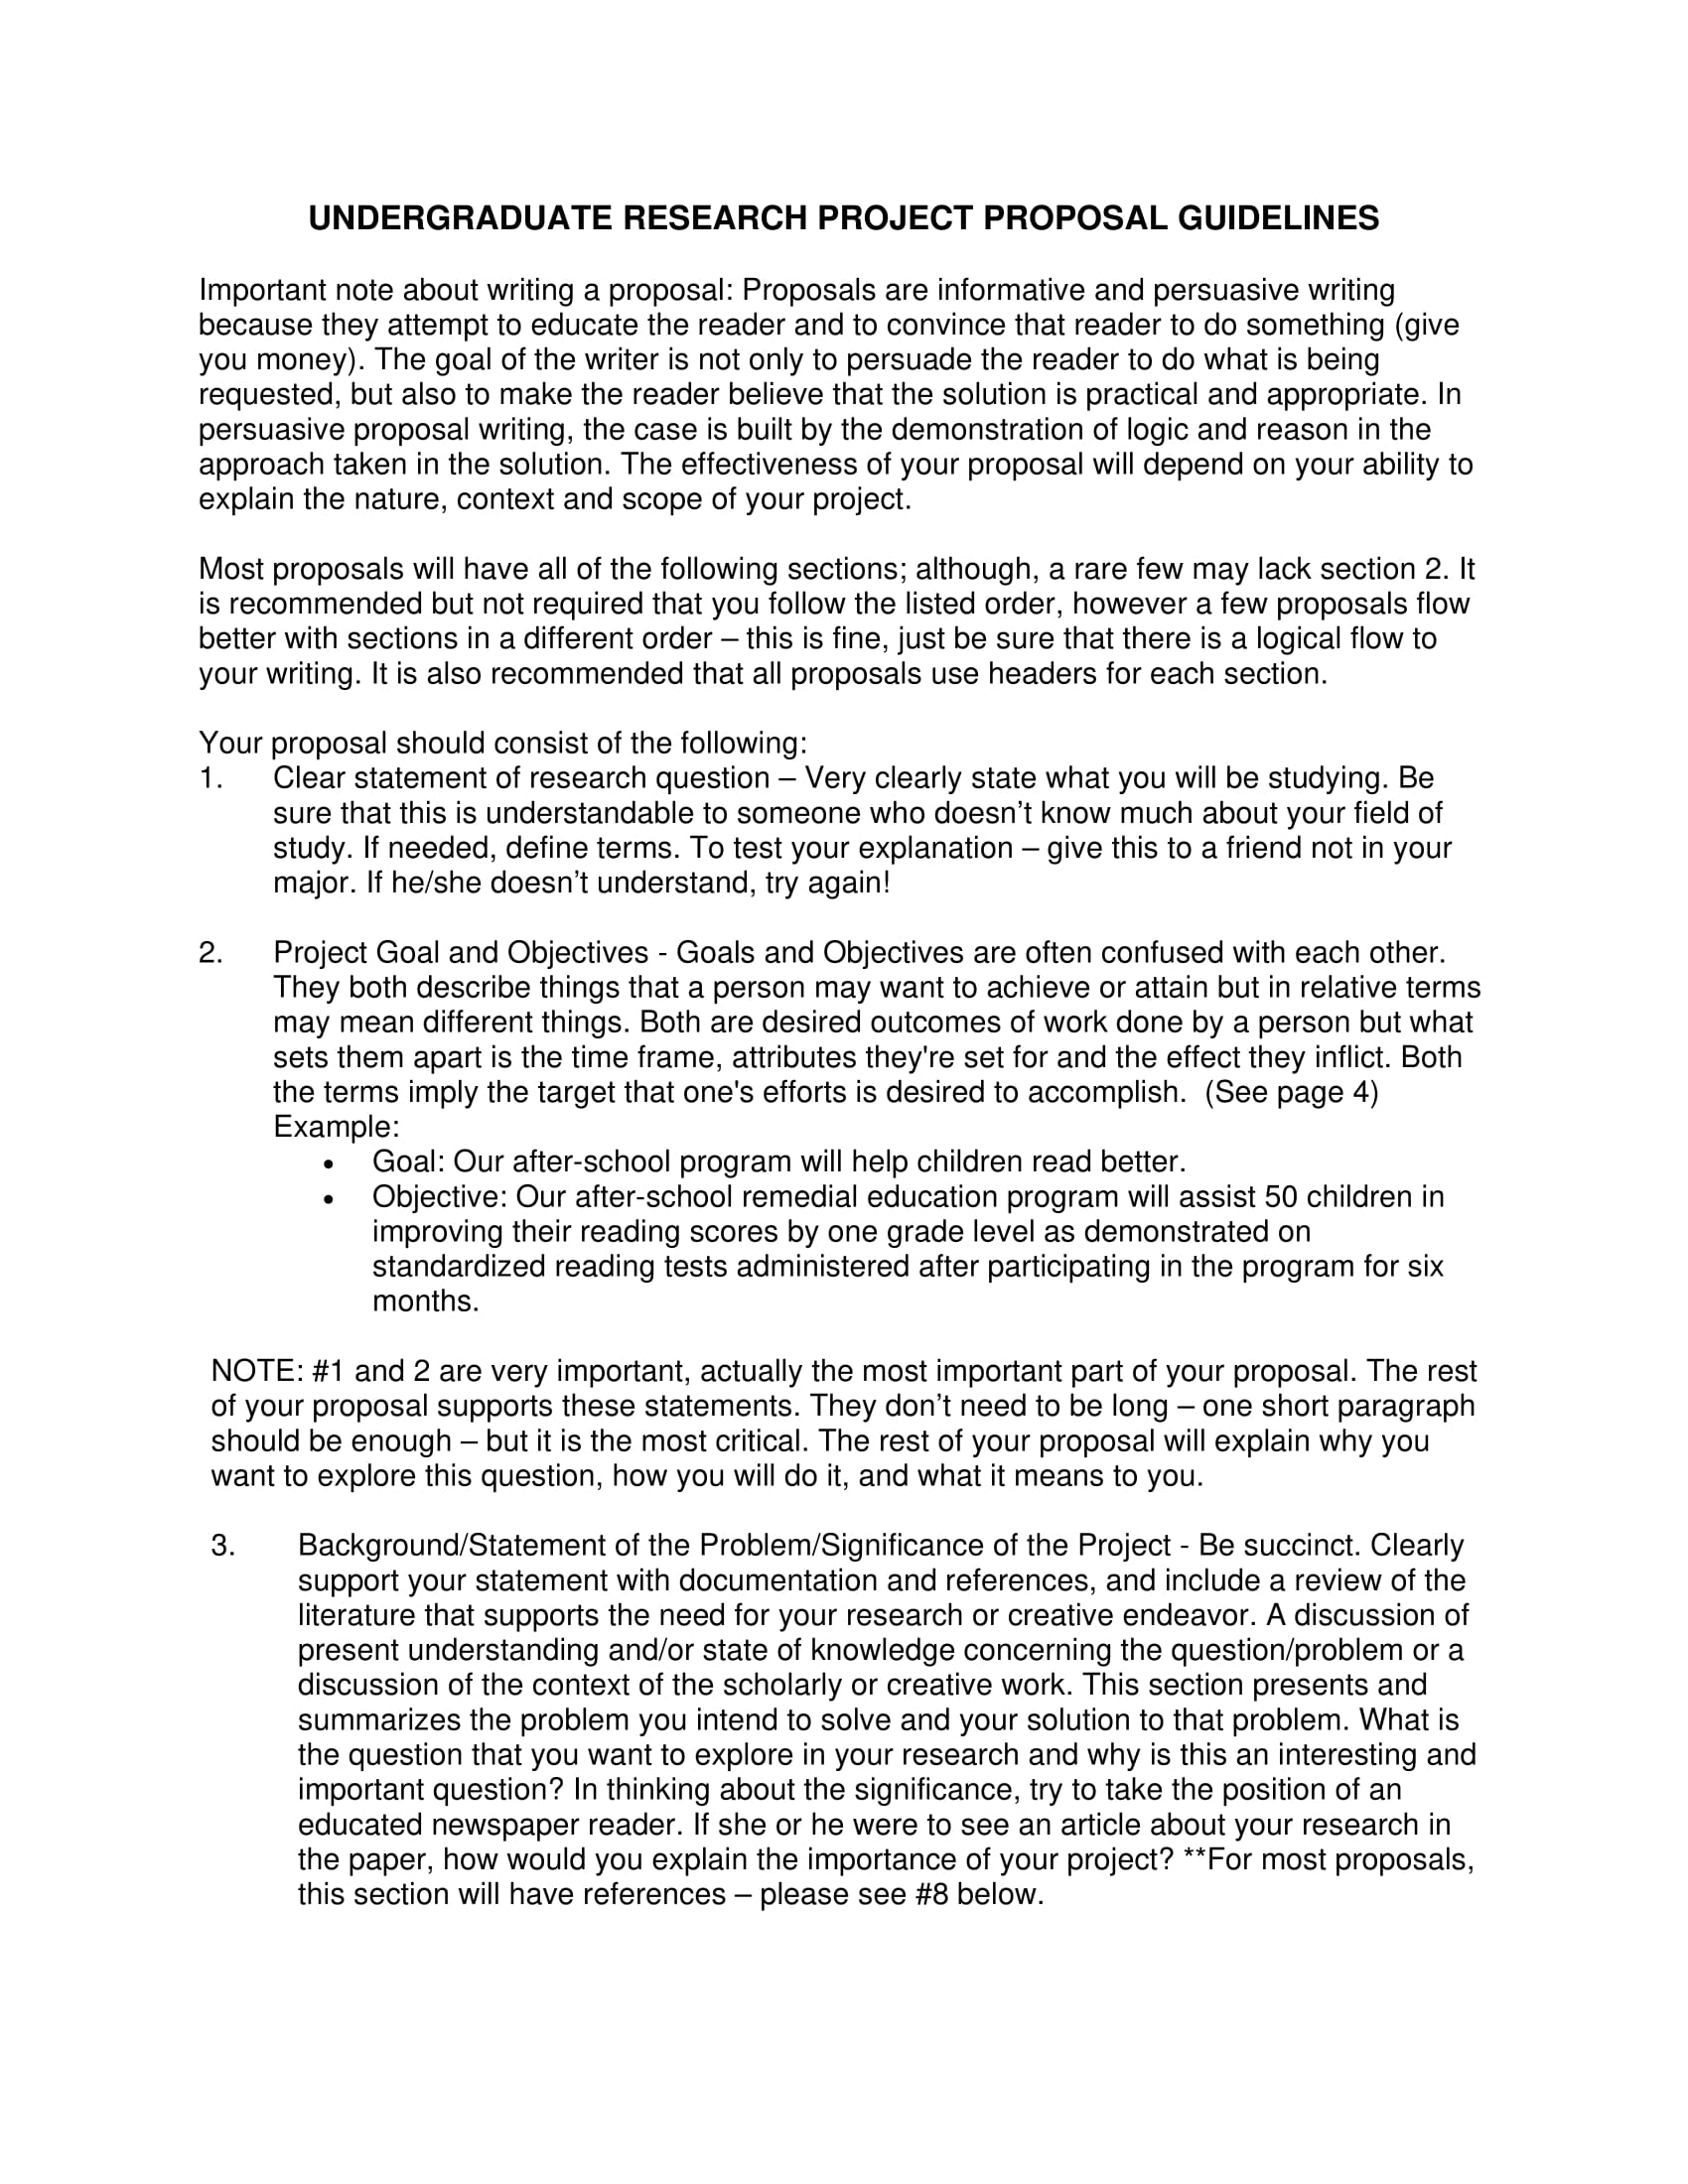 undergraduate research project proposal guidelines example 1